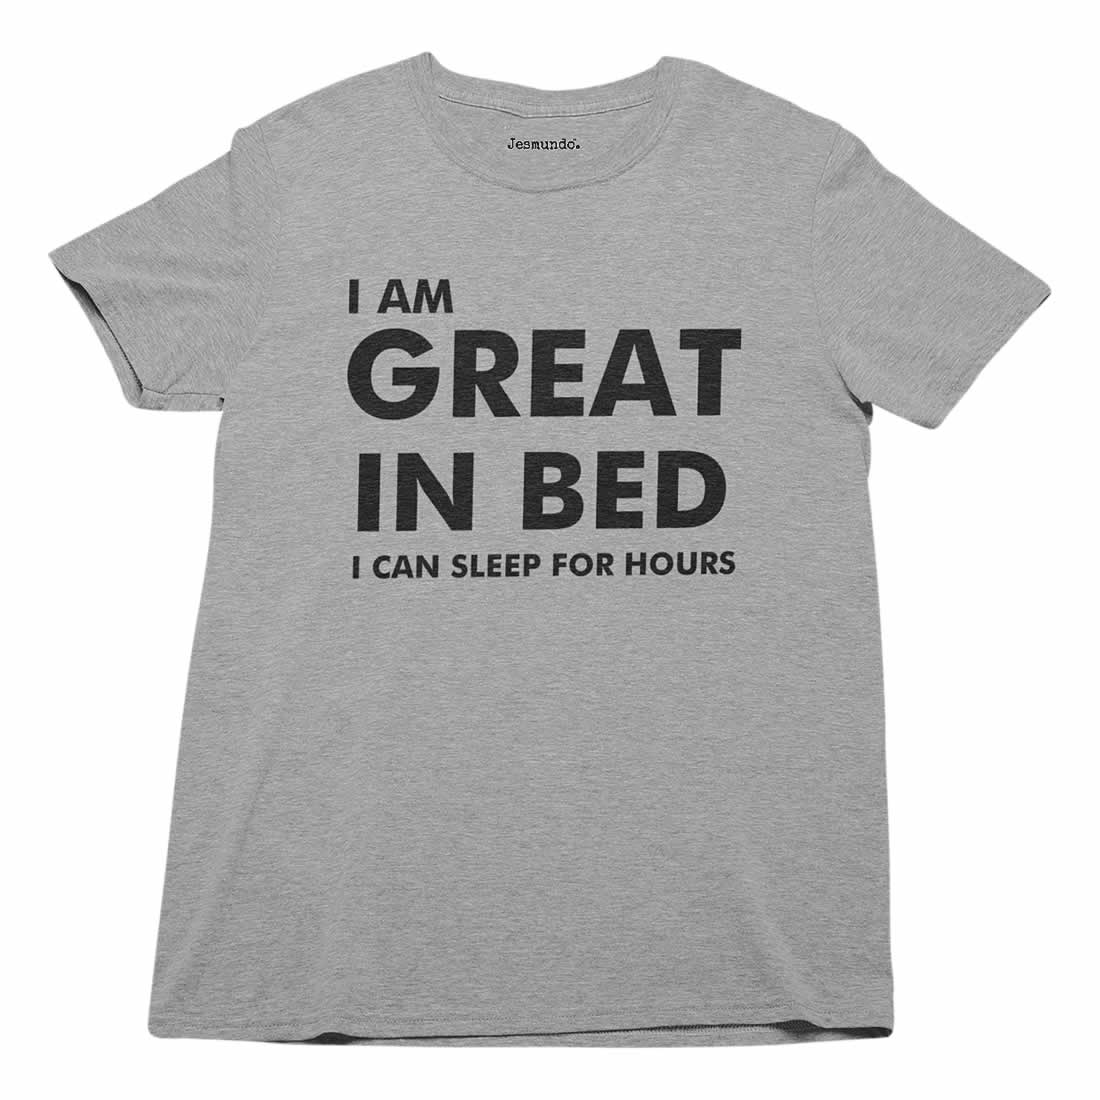 I am great in bed I can sleep for hours T Shirt